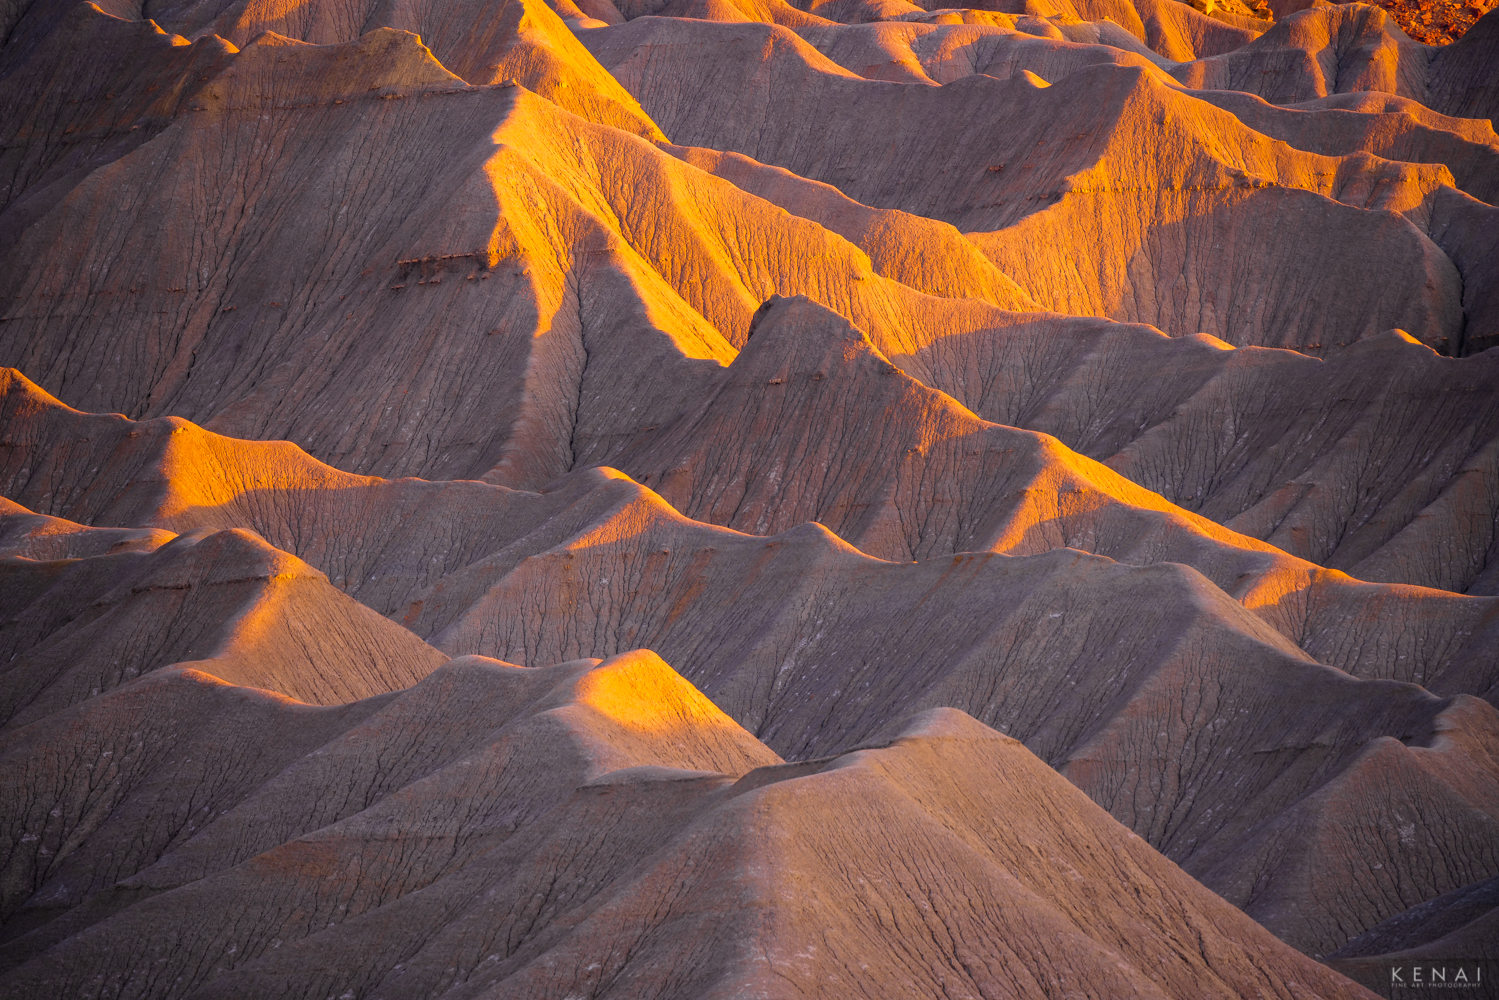 Abstract image of rugged landscape at dawn in Utah.